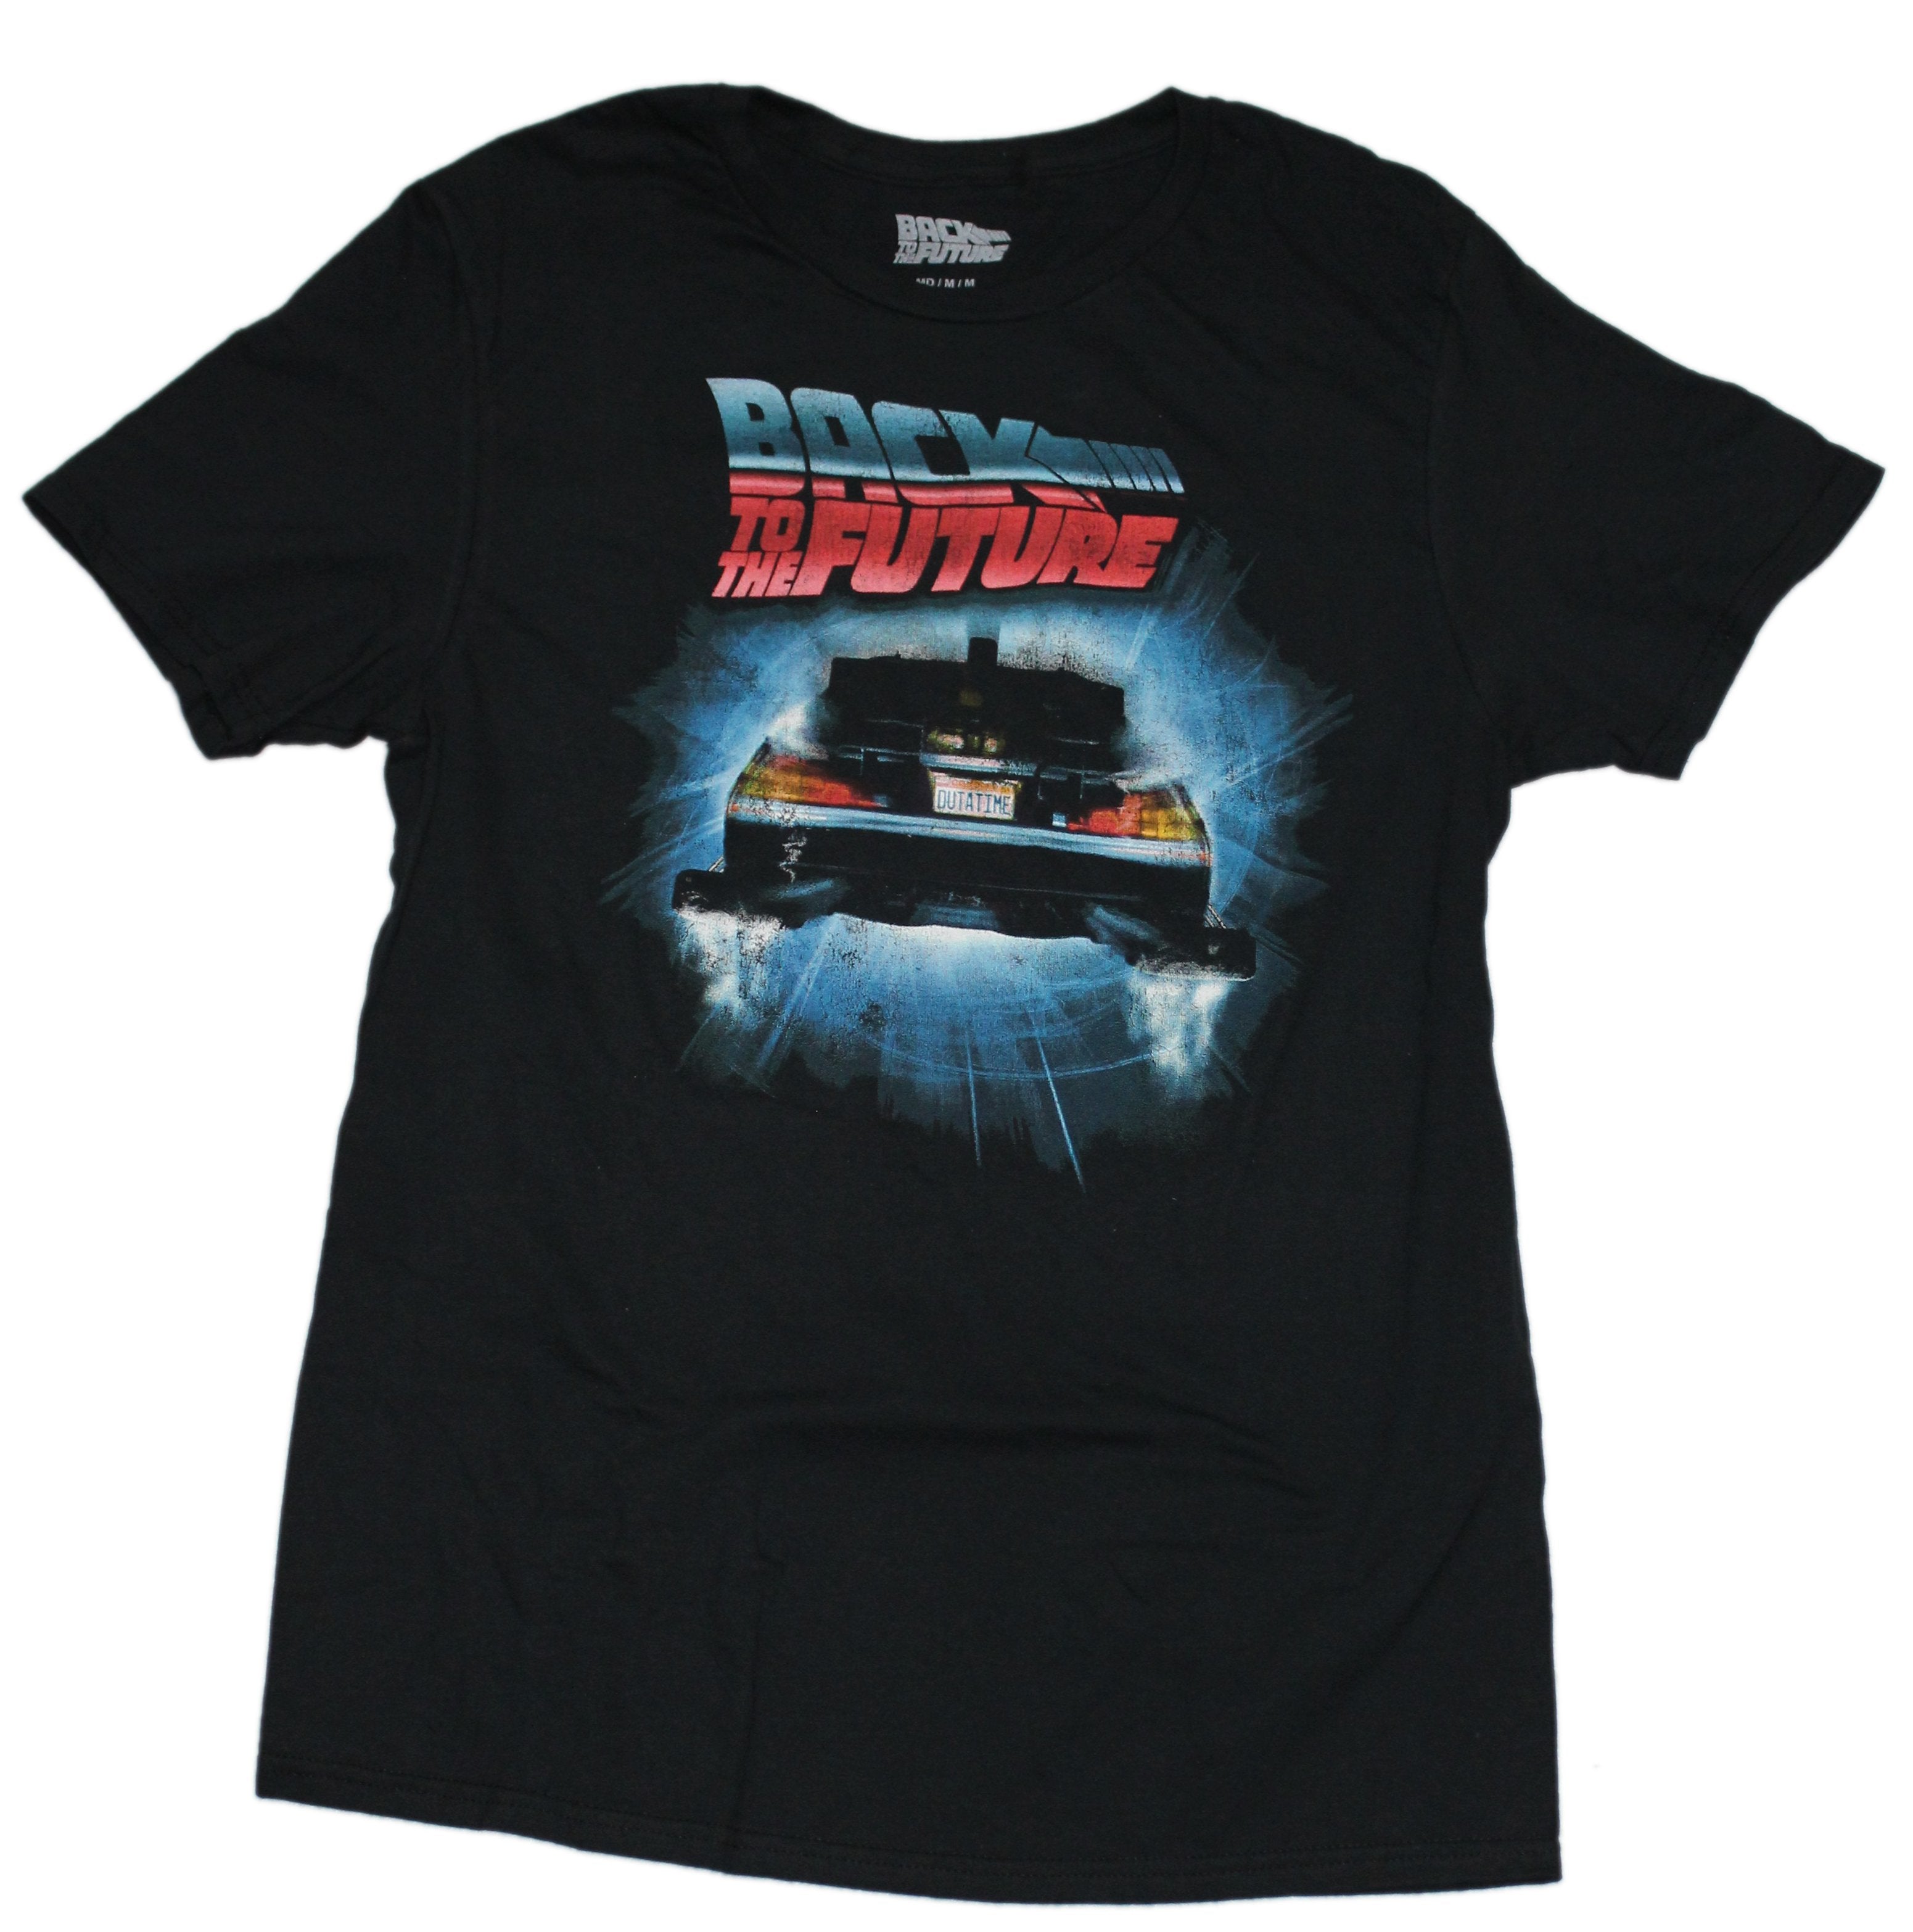 Back to the Future Mens T-shirt - DeLorean OutATime license plate